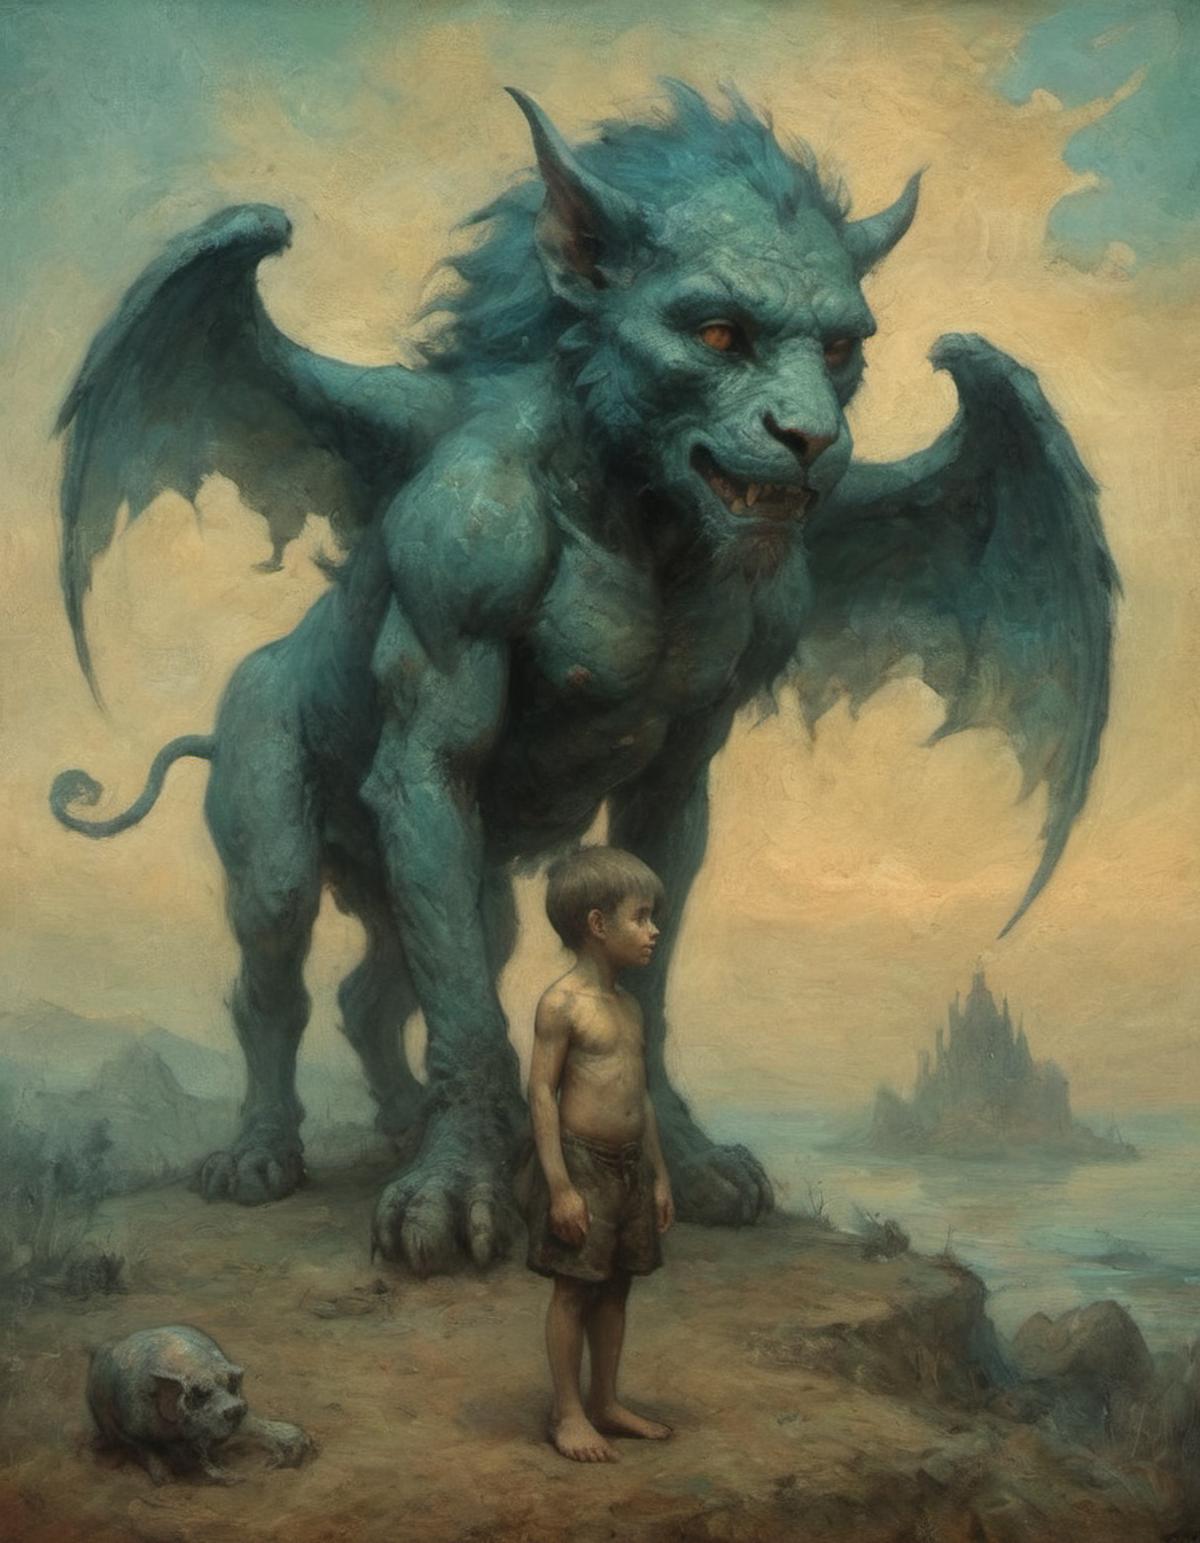 A young boy standing next to a blue dragon.